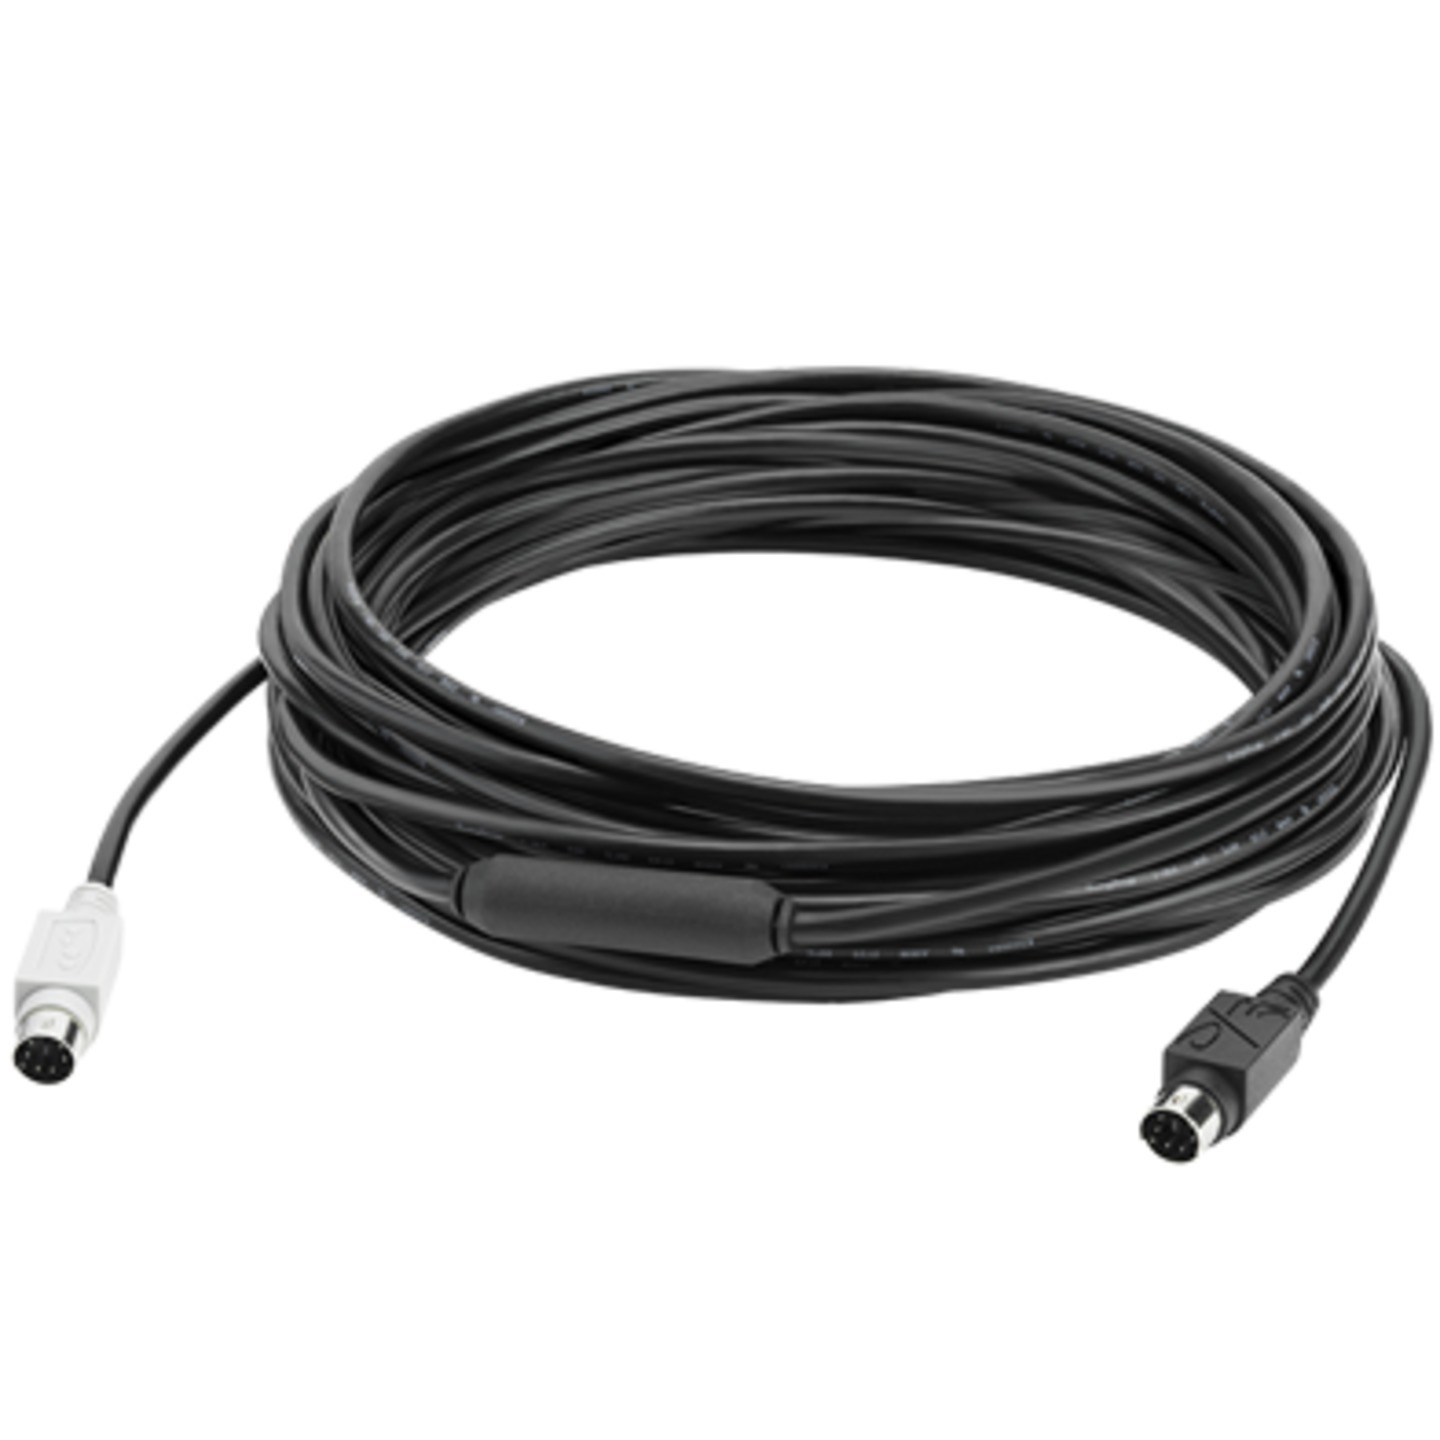 GROUP 10M EXTENDED CABLE [Optional Add-On for Logitech Group]